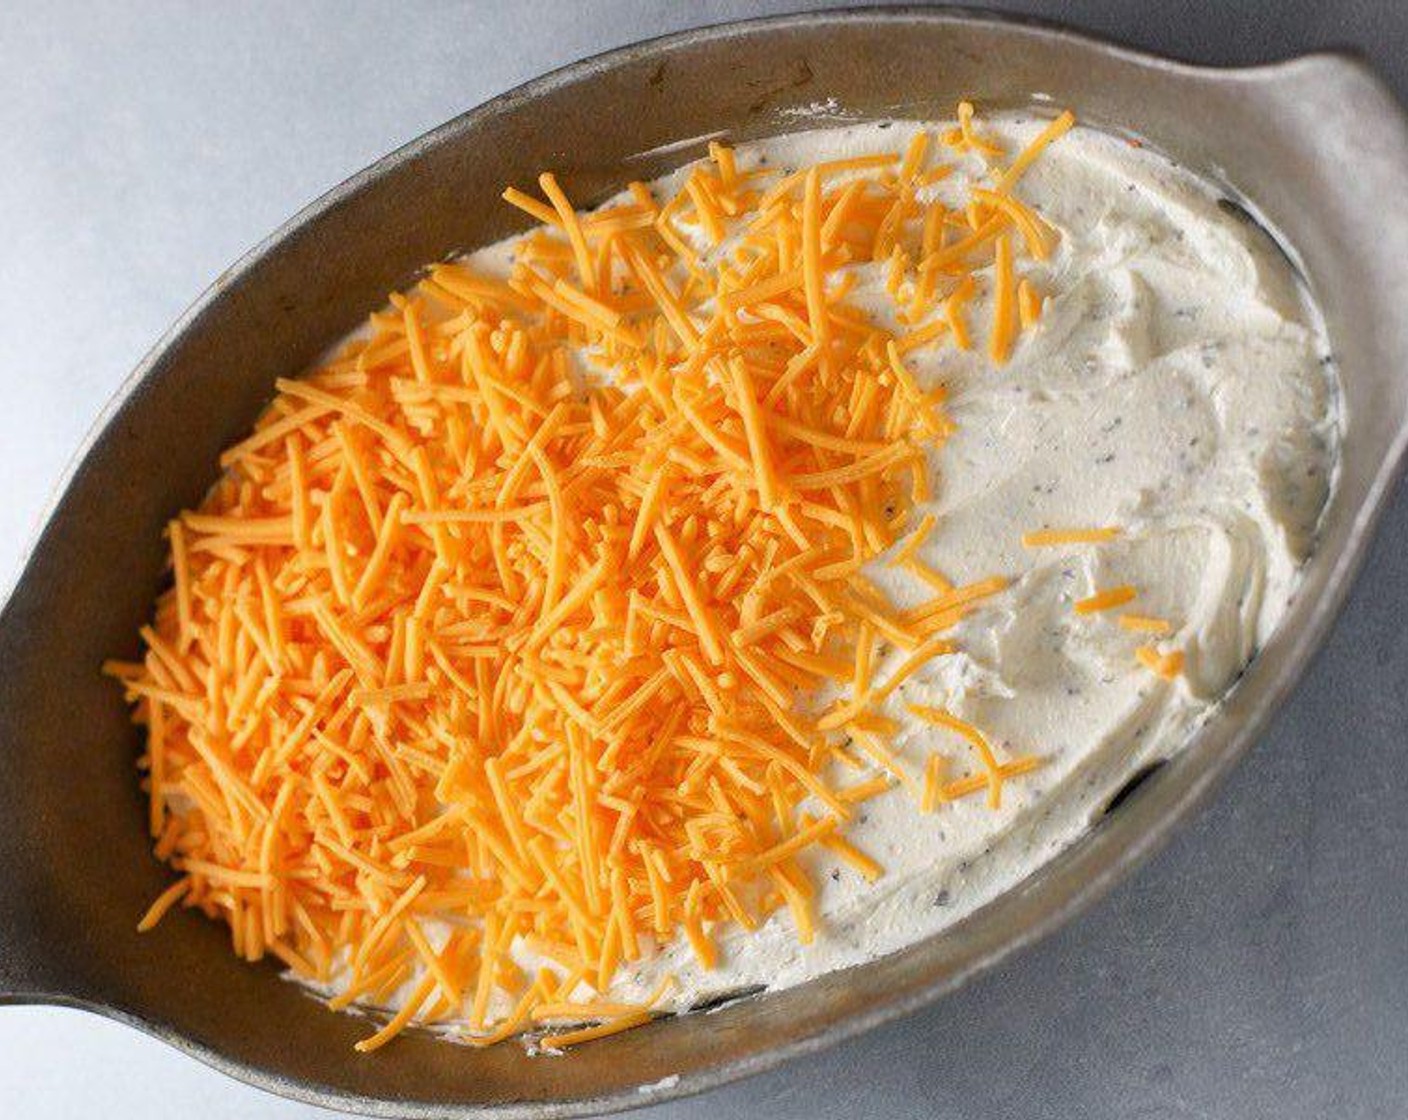 step 4 Spread half the Cheddar Cheese (1 cup) and half the Mozzarella Cheese (1 cup) on top of the cream cheese base.